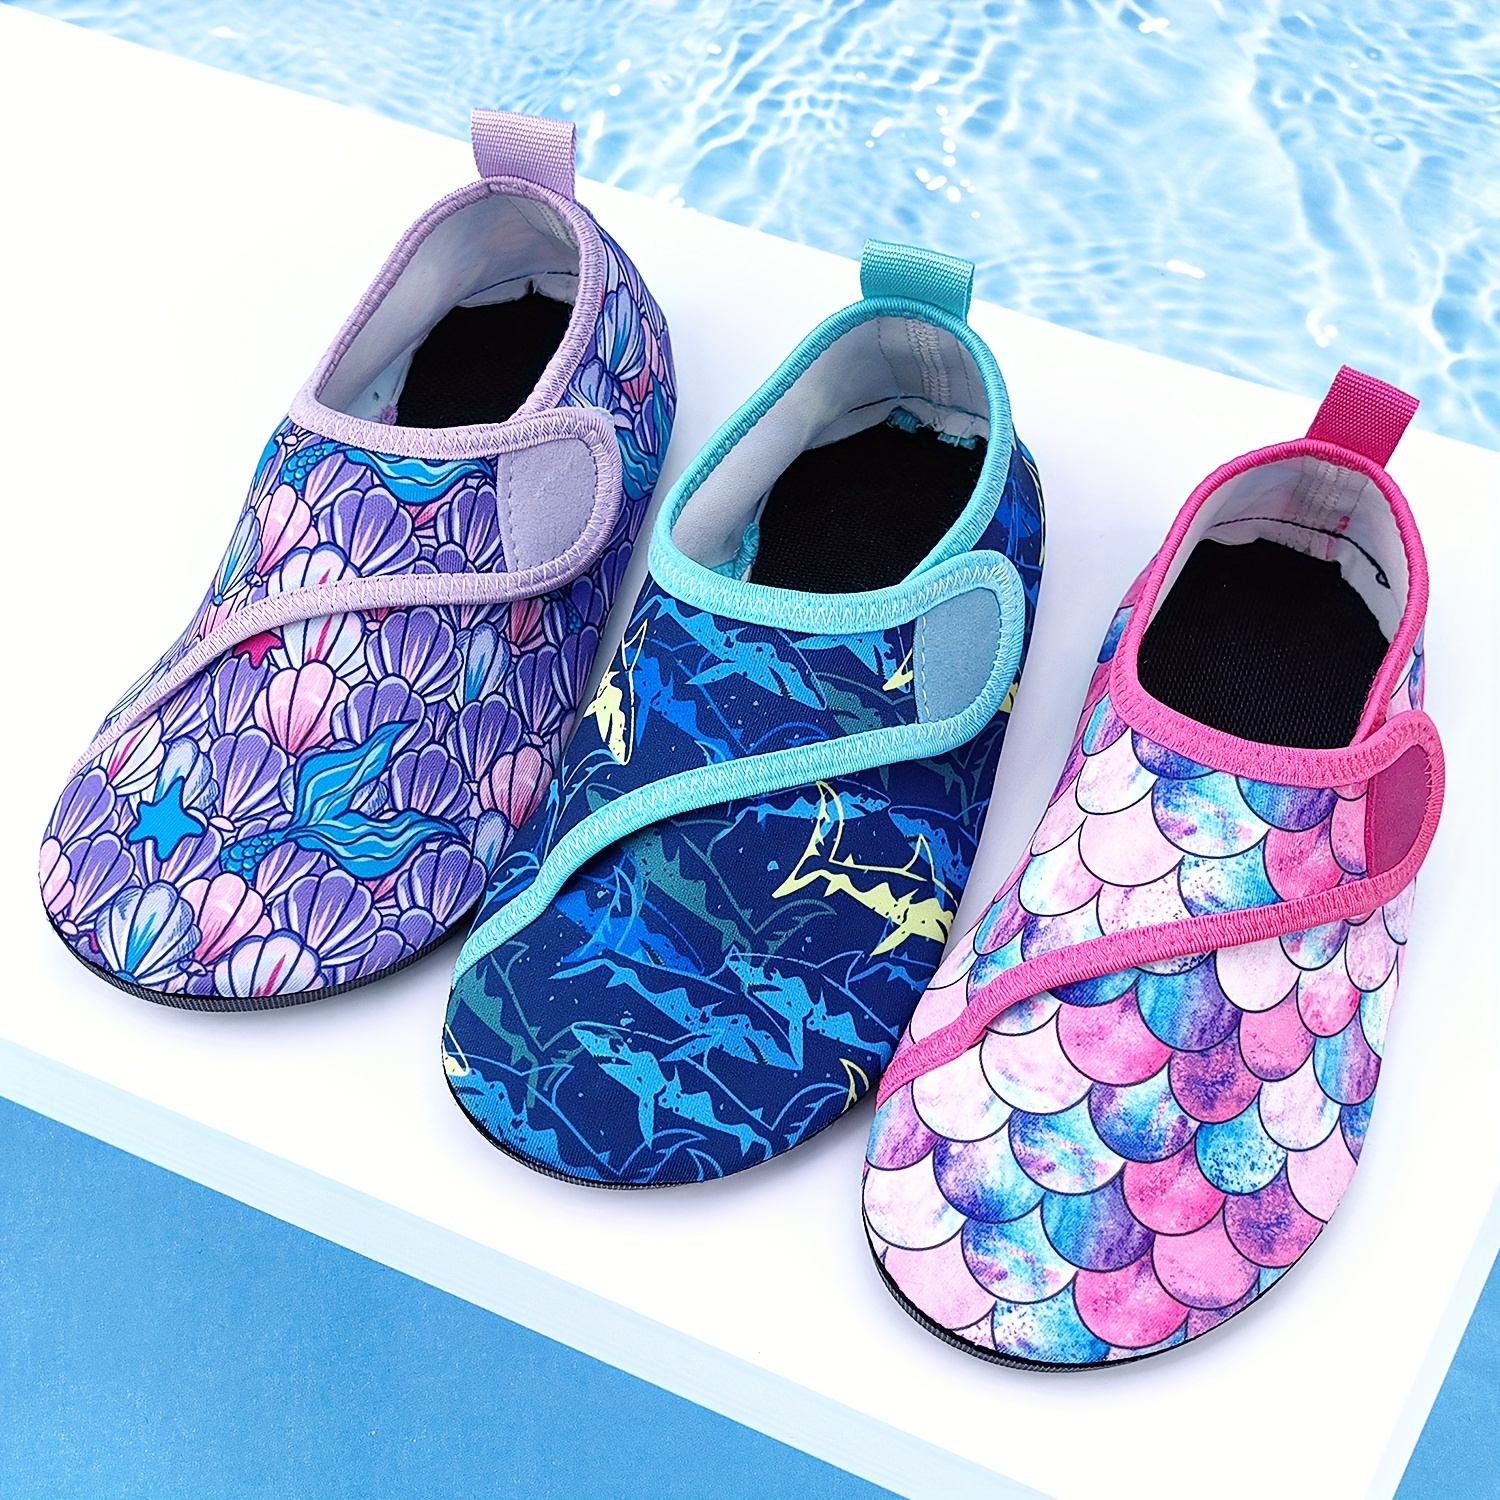 

Colorful Water Shoes, Lightweight Quick Dry Aqua Socks, Girls Outdoor Summer Beach Swimming Shoes, Beach Shoes, Sports Swimming Shoes For Girls, Adjustable Thick Soft Soles